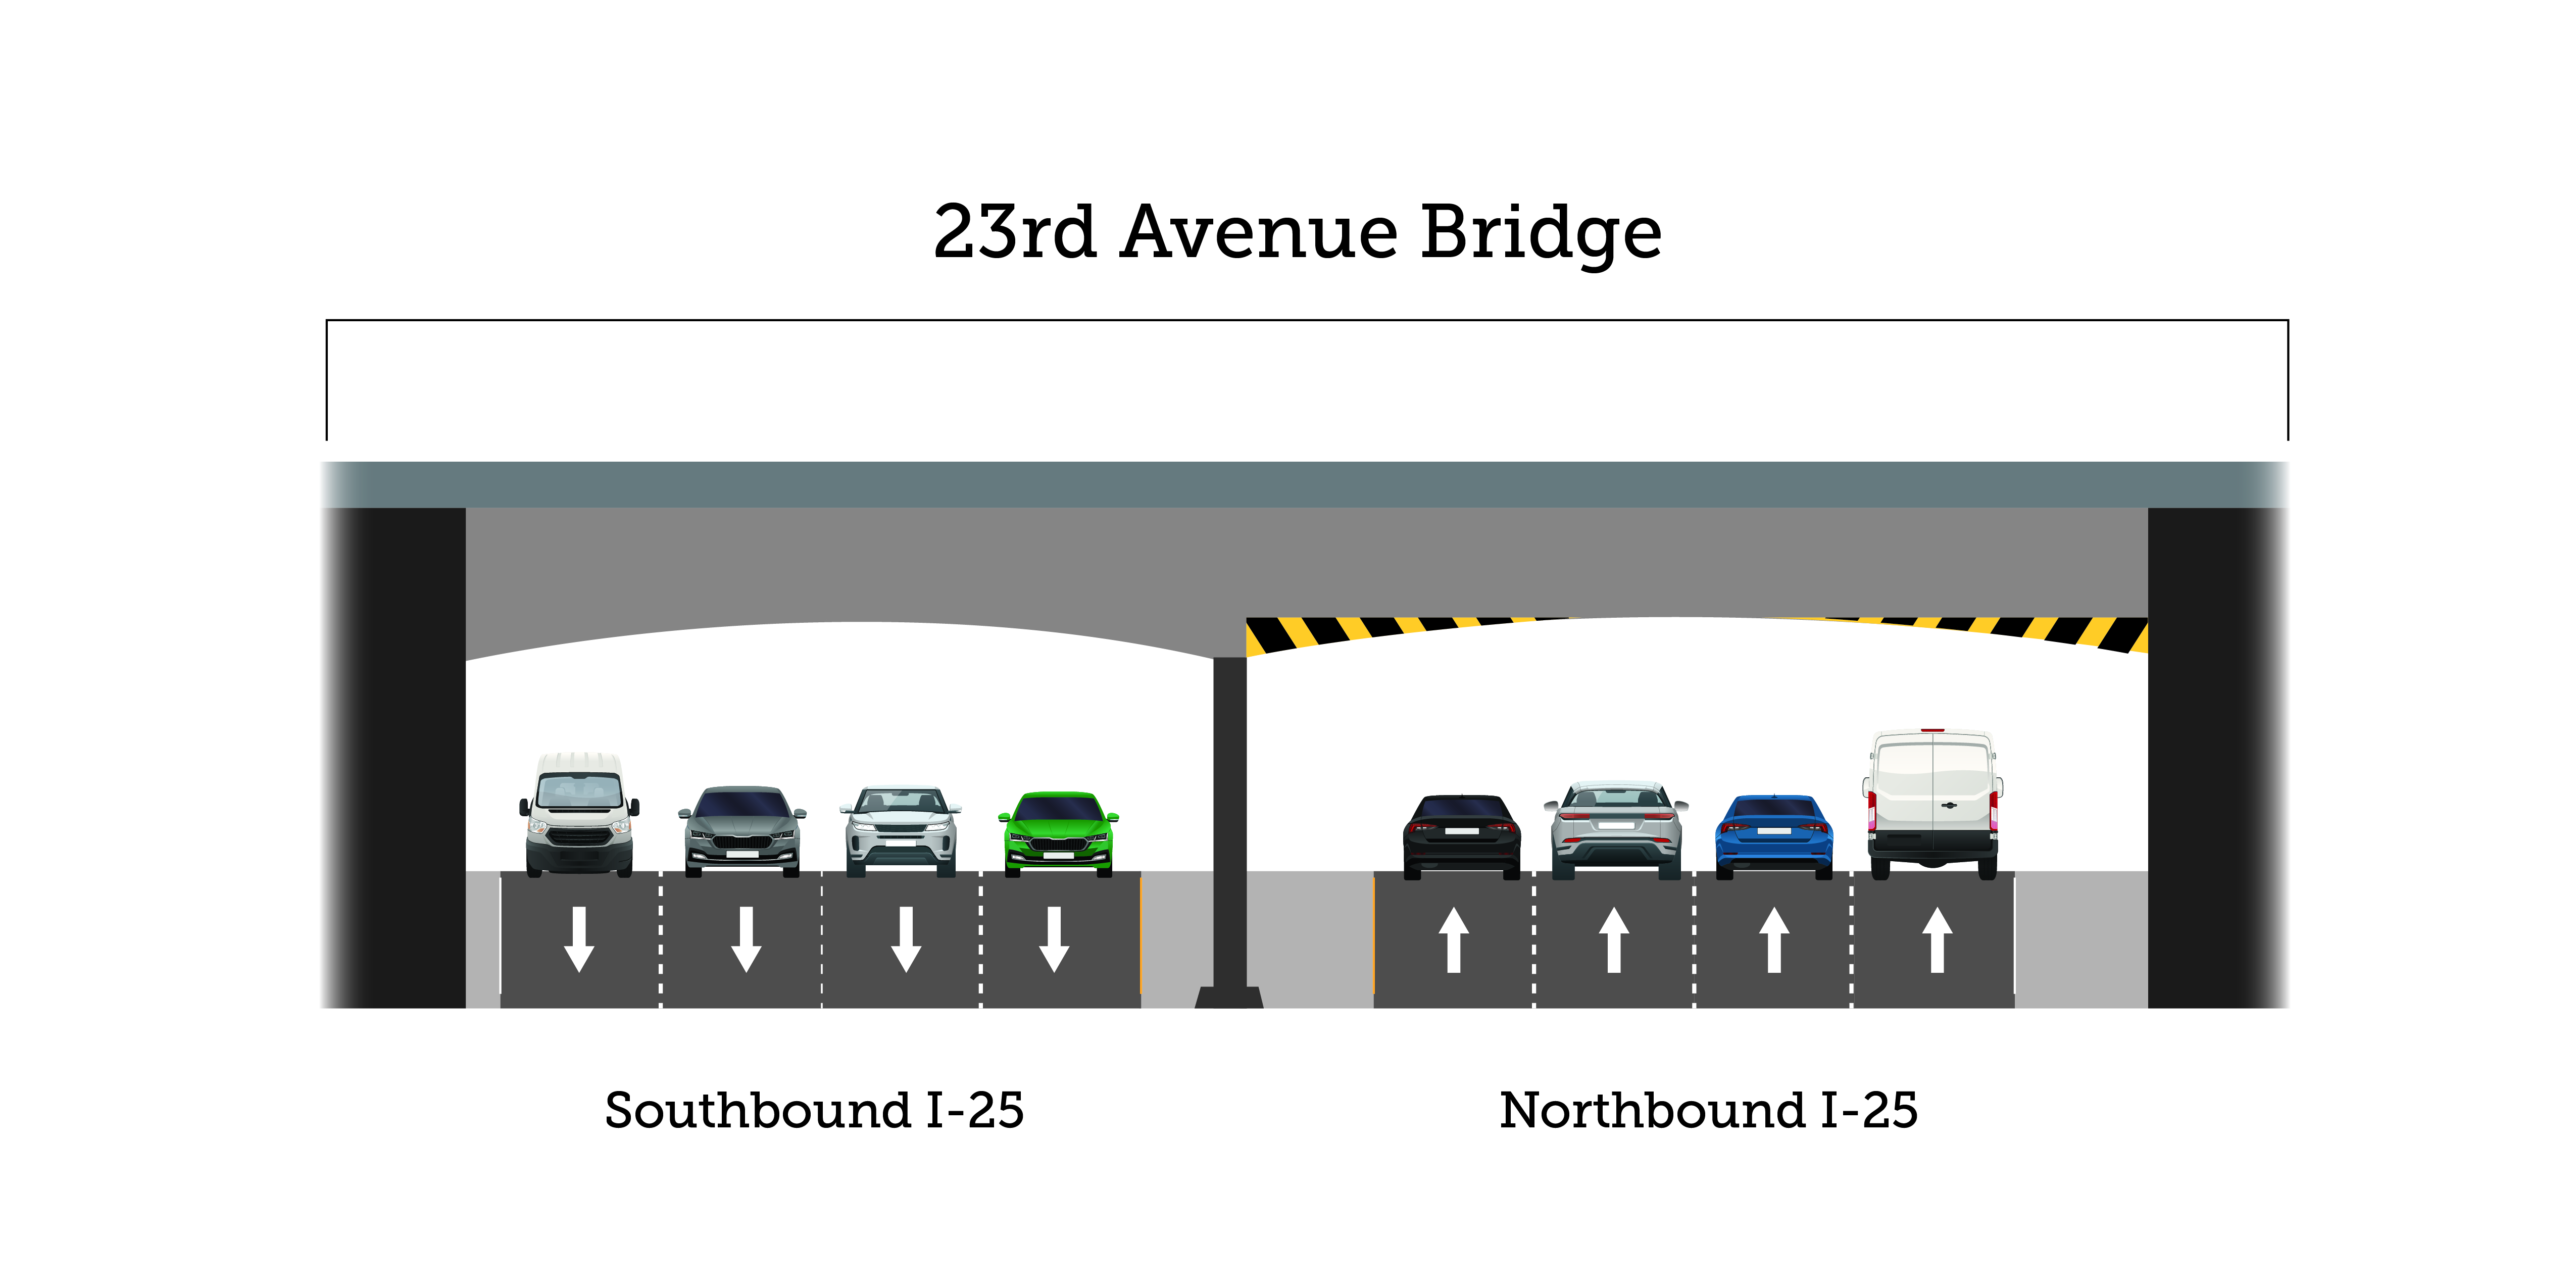 23rd Avenue Bridge Cross Section graphic on north and southbound I-25.jpg detail image